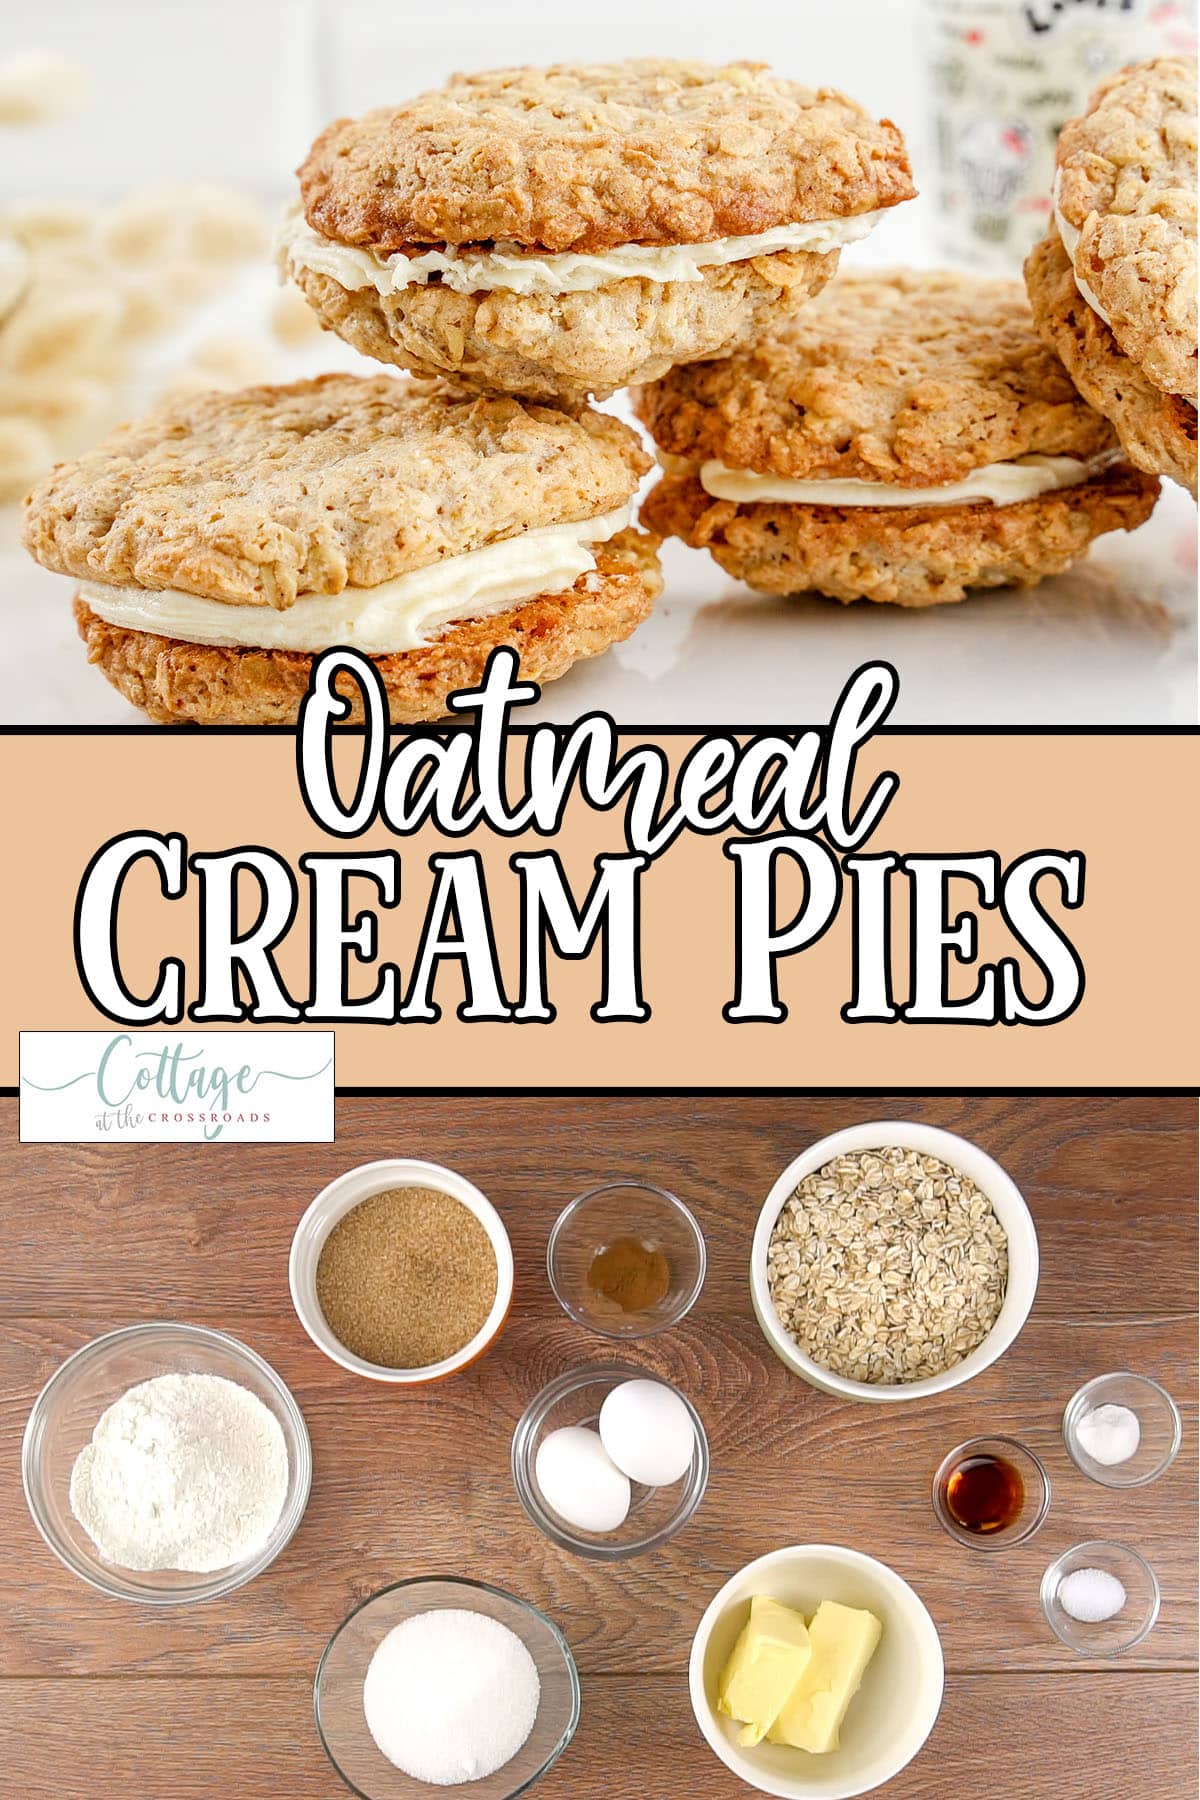 Photo collage of ingredients and finished oatmeal cookie sandwiches with text which reads oatmeal cream pies